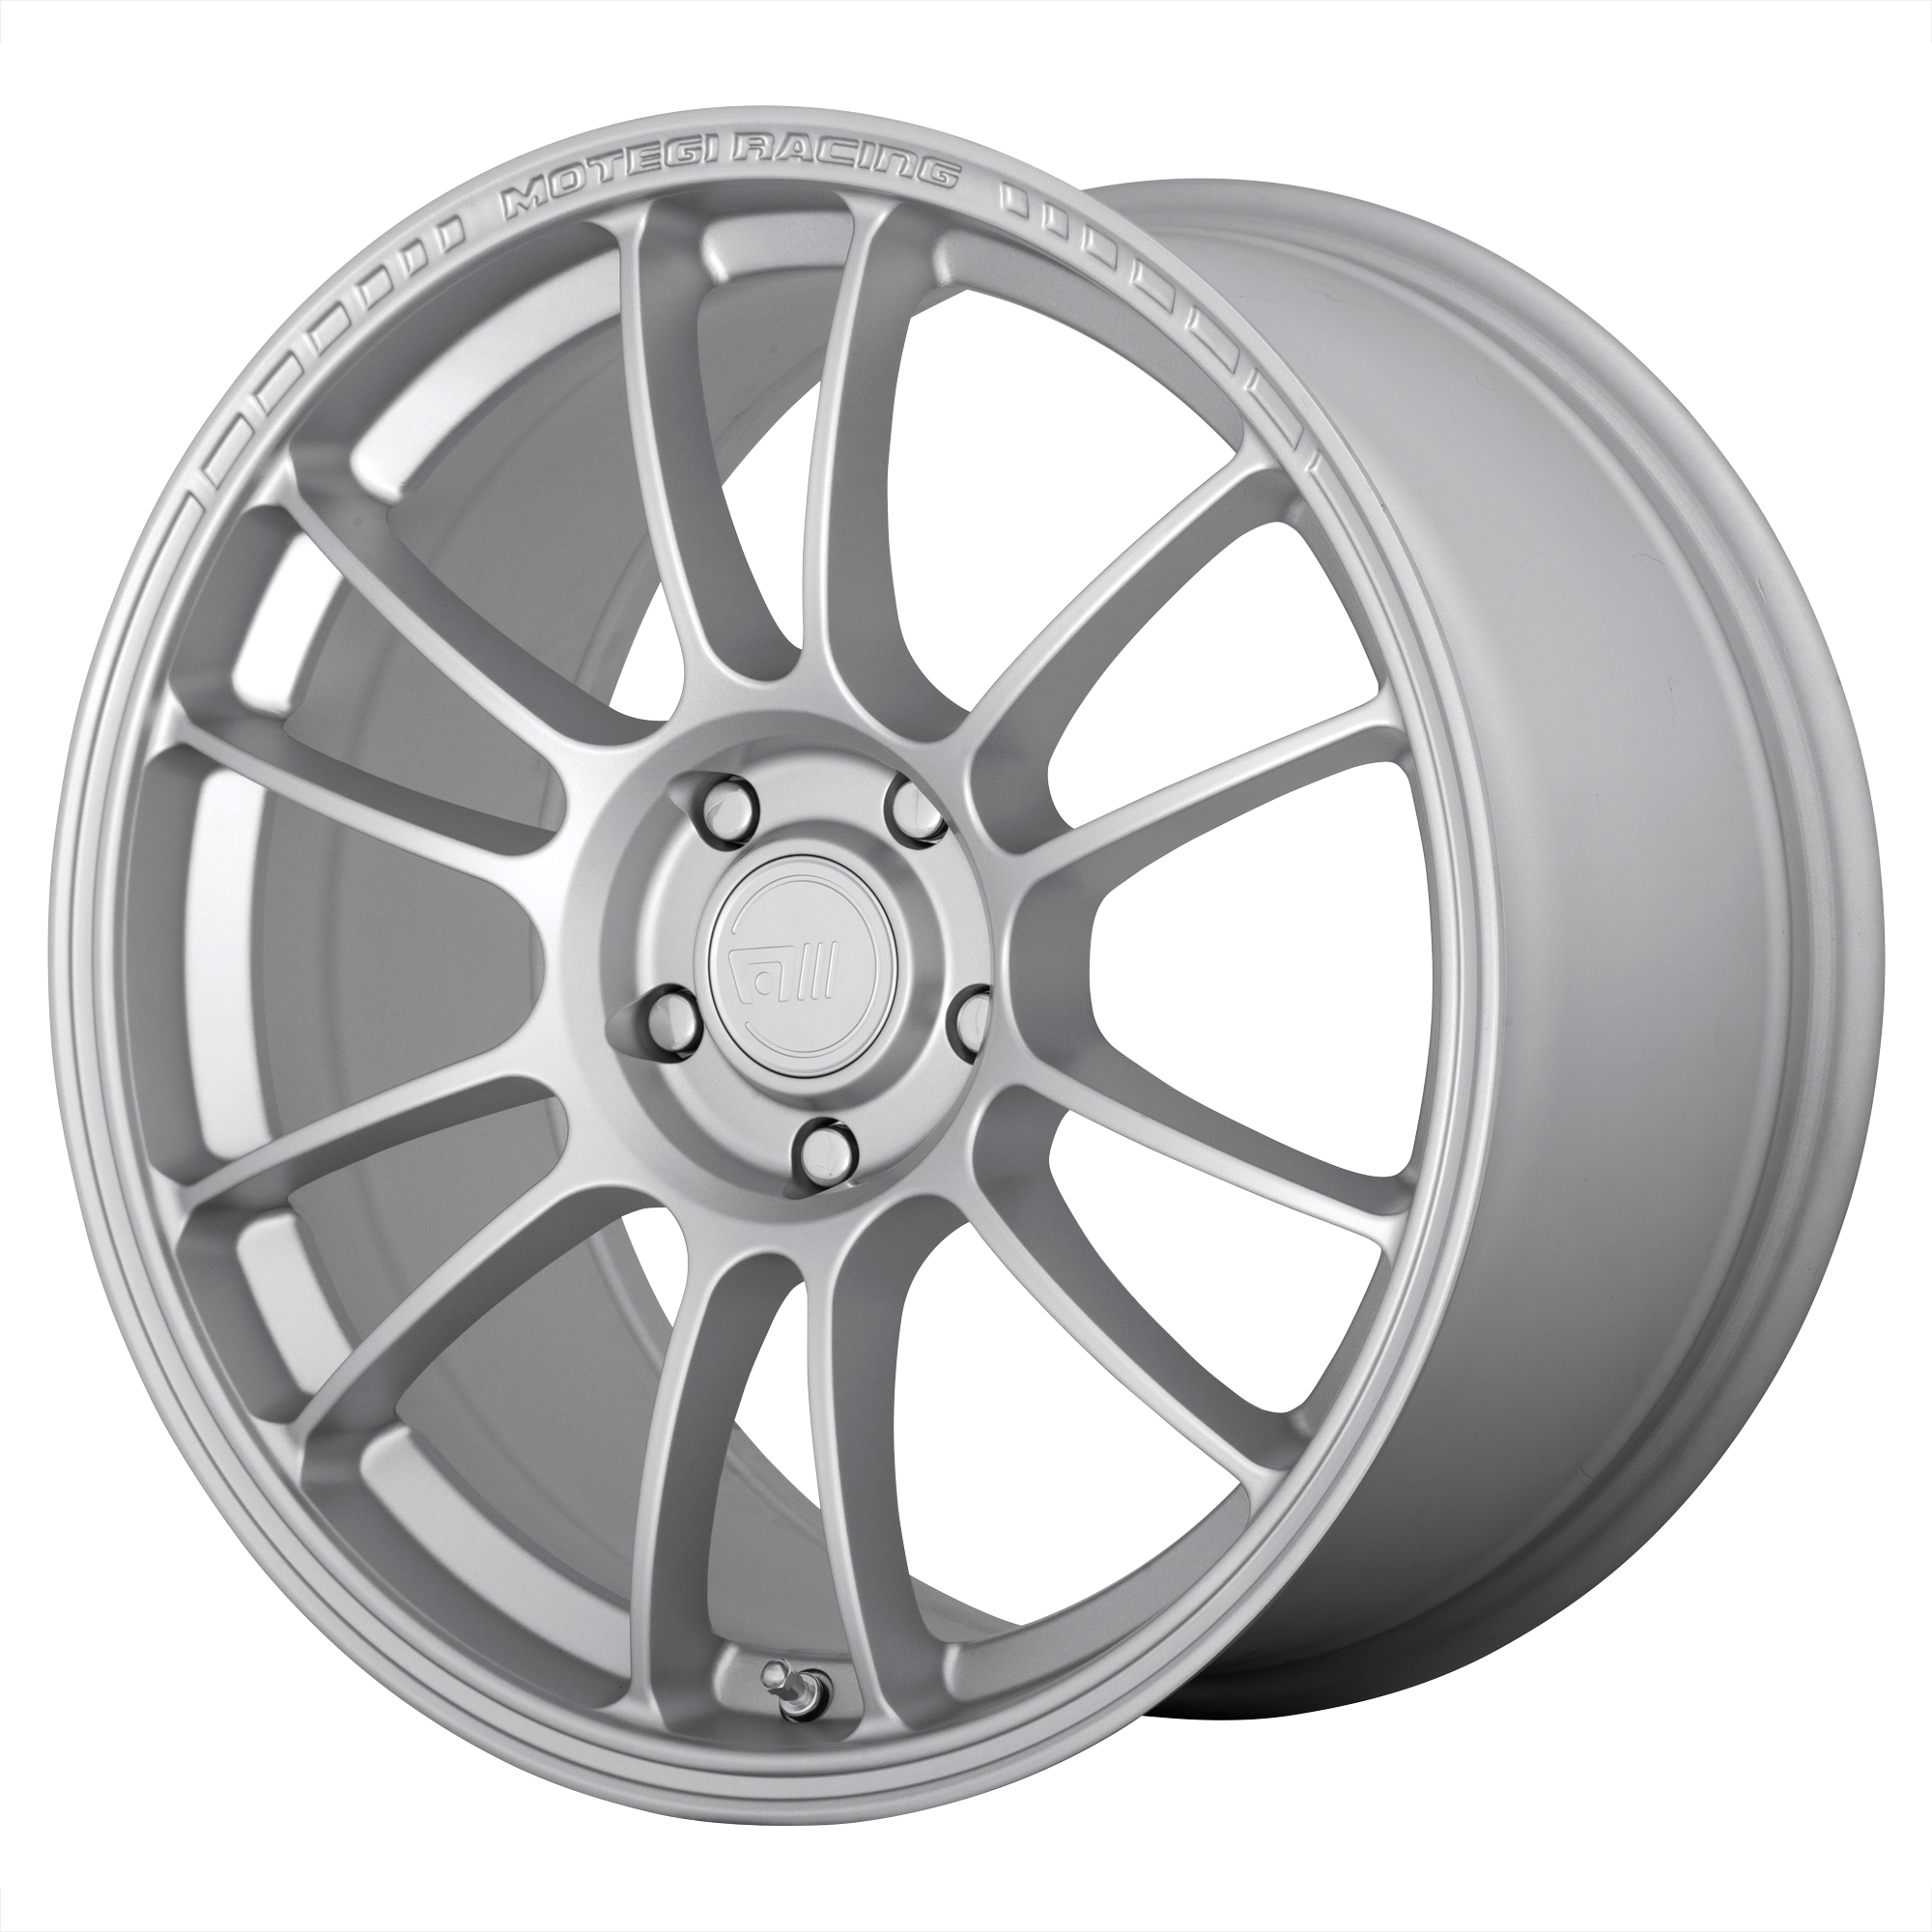 SS6 18x8.5 5x120.00 HYPER SILVER (35 mm) - Tires and Engine Performance